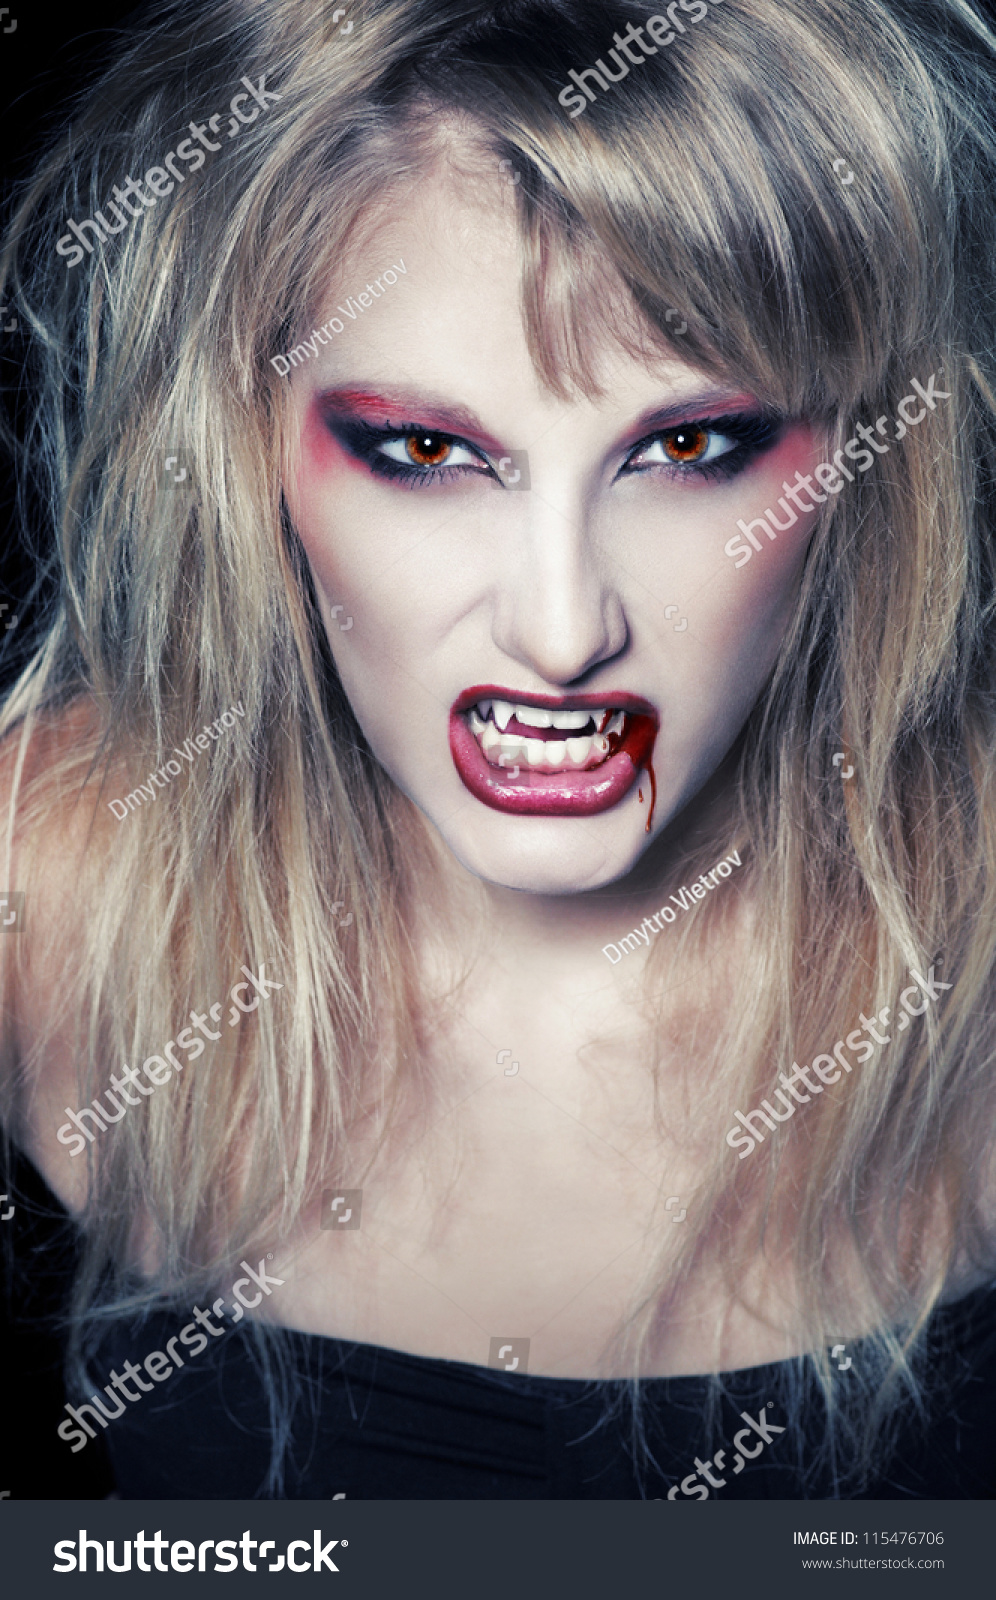 The Portrait Of A Blond Girl Vampire With Bloody Streaks Stock Photo ...